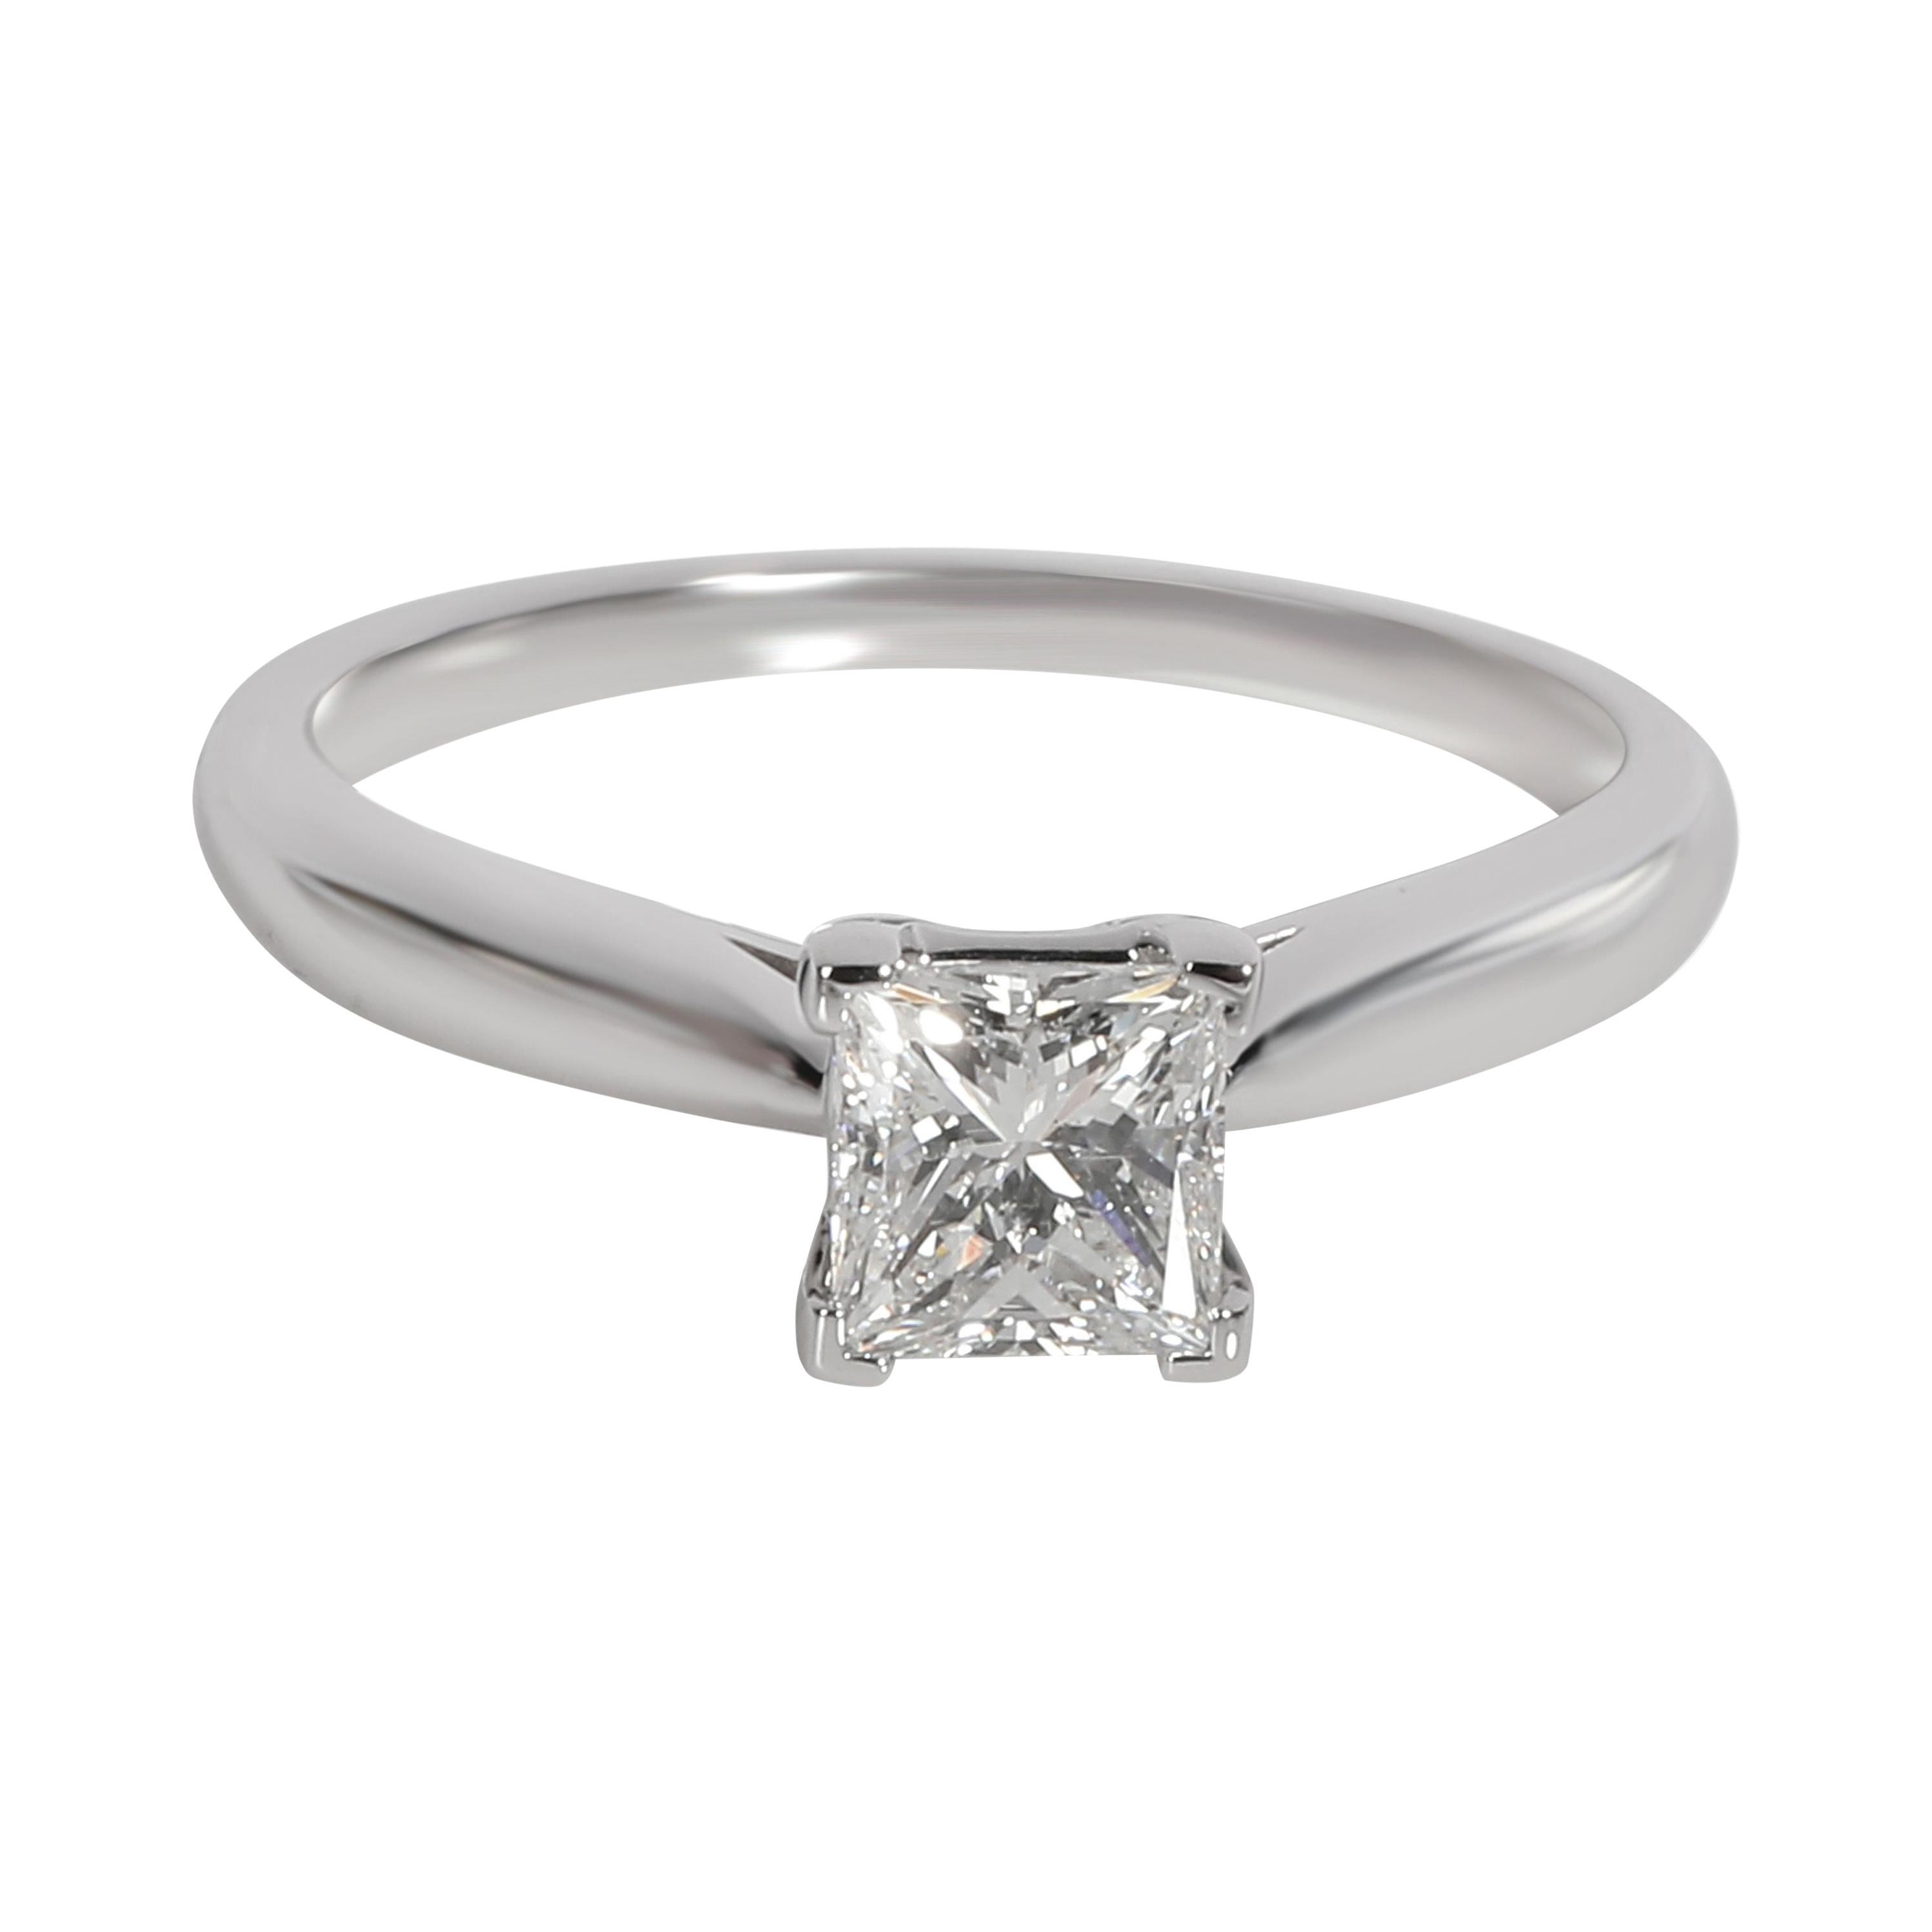 Princess Cut Diamond Engagement Ring in 14KT White Gold GSI G SI2 0.70 Ct